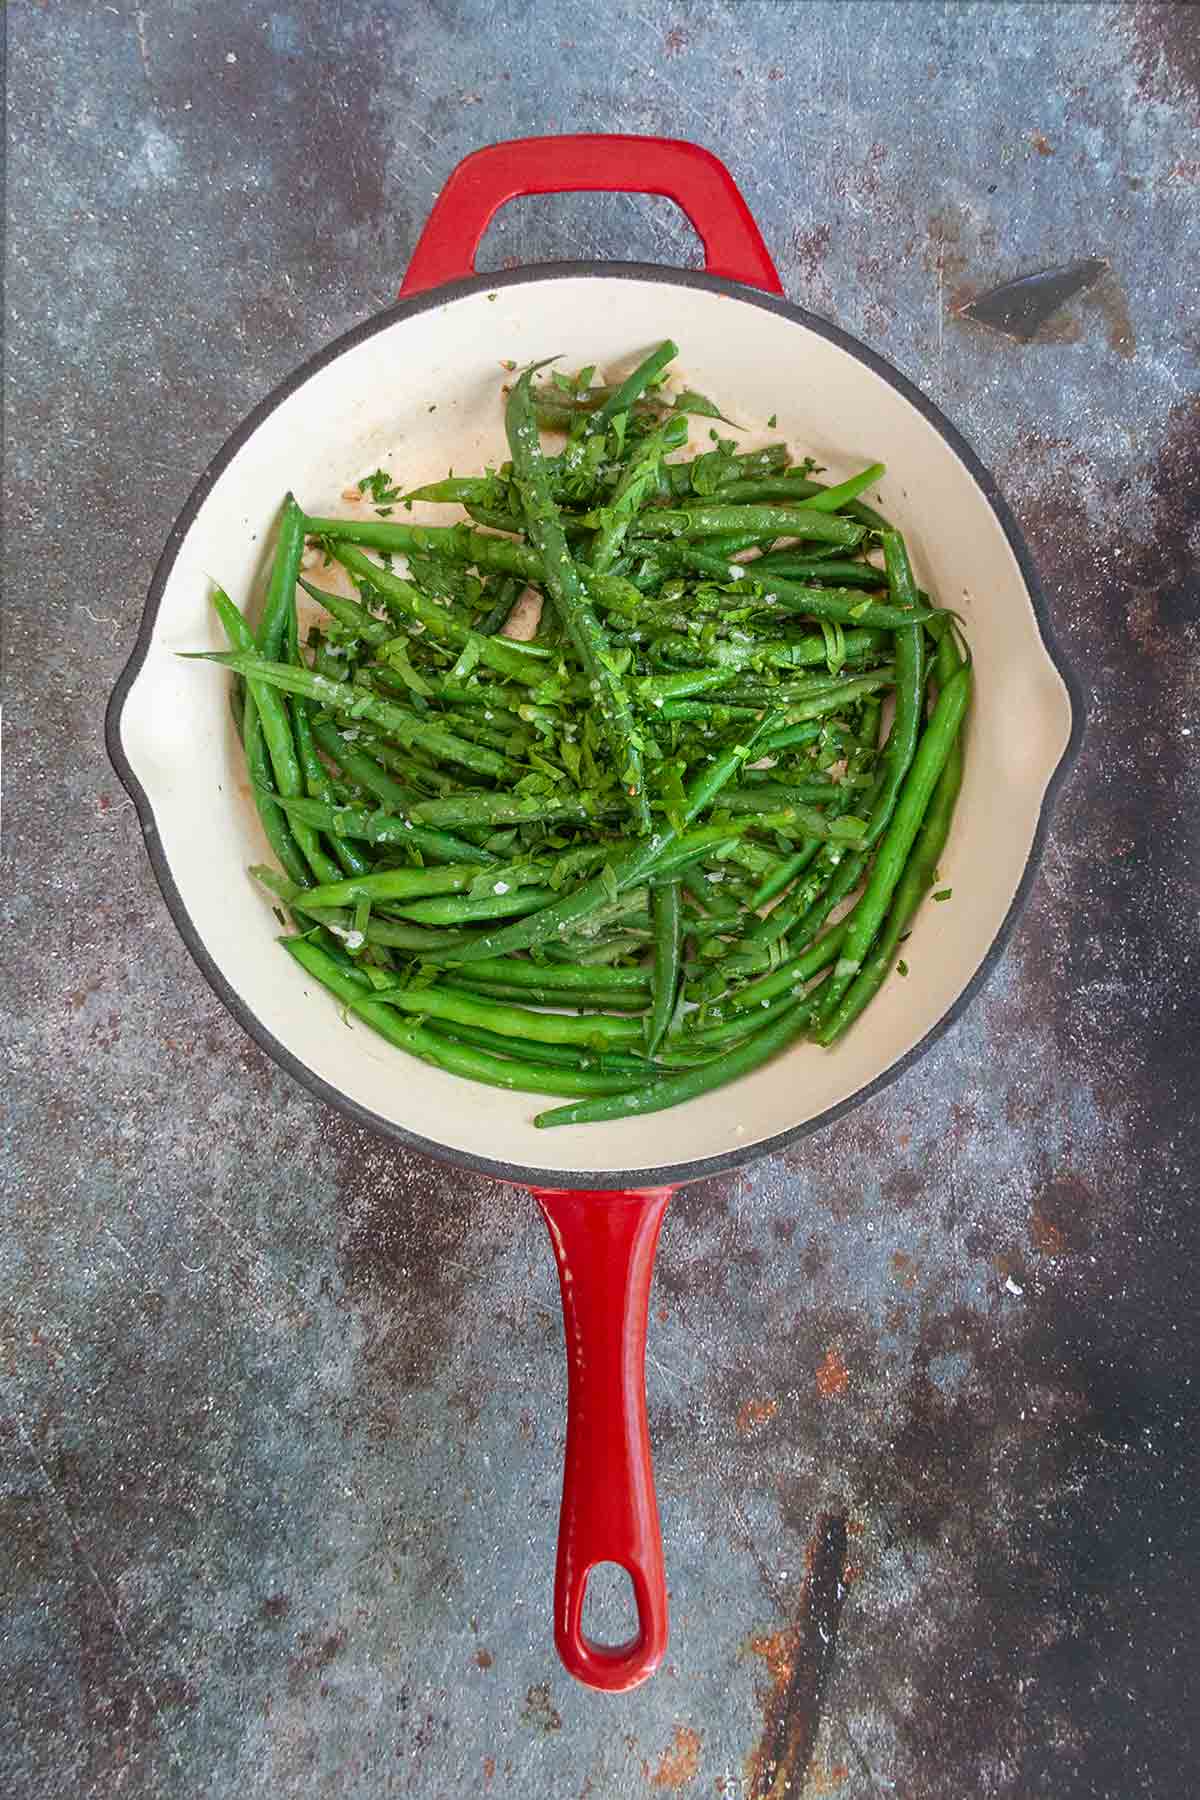 Pan-fried green beans in a red skillet.